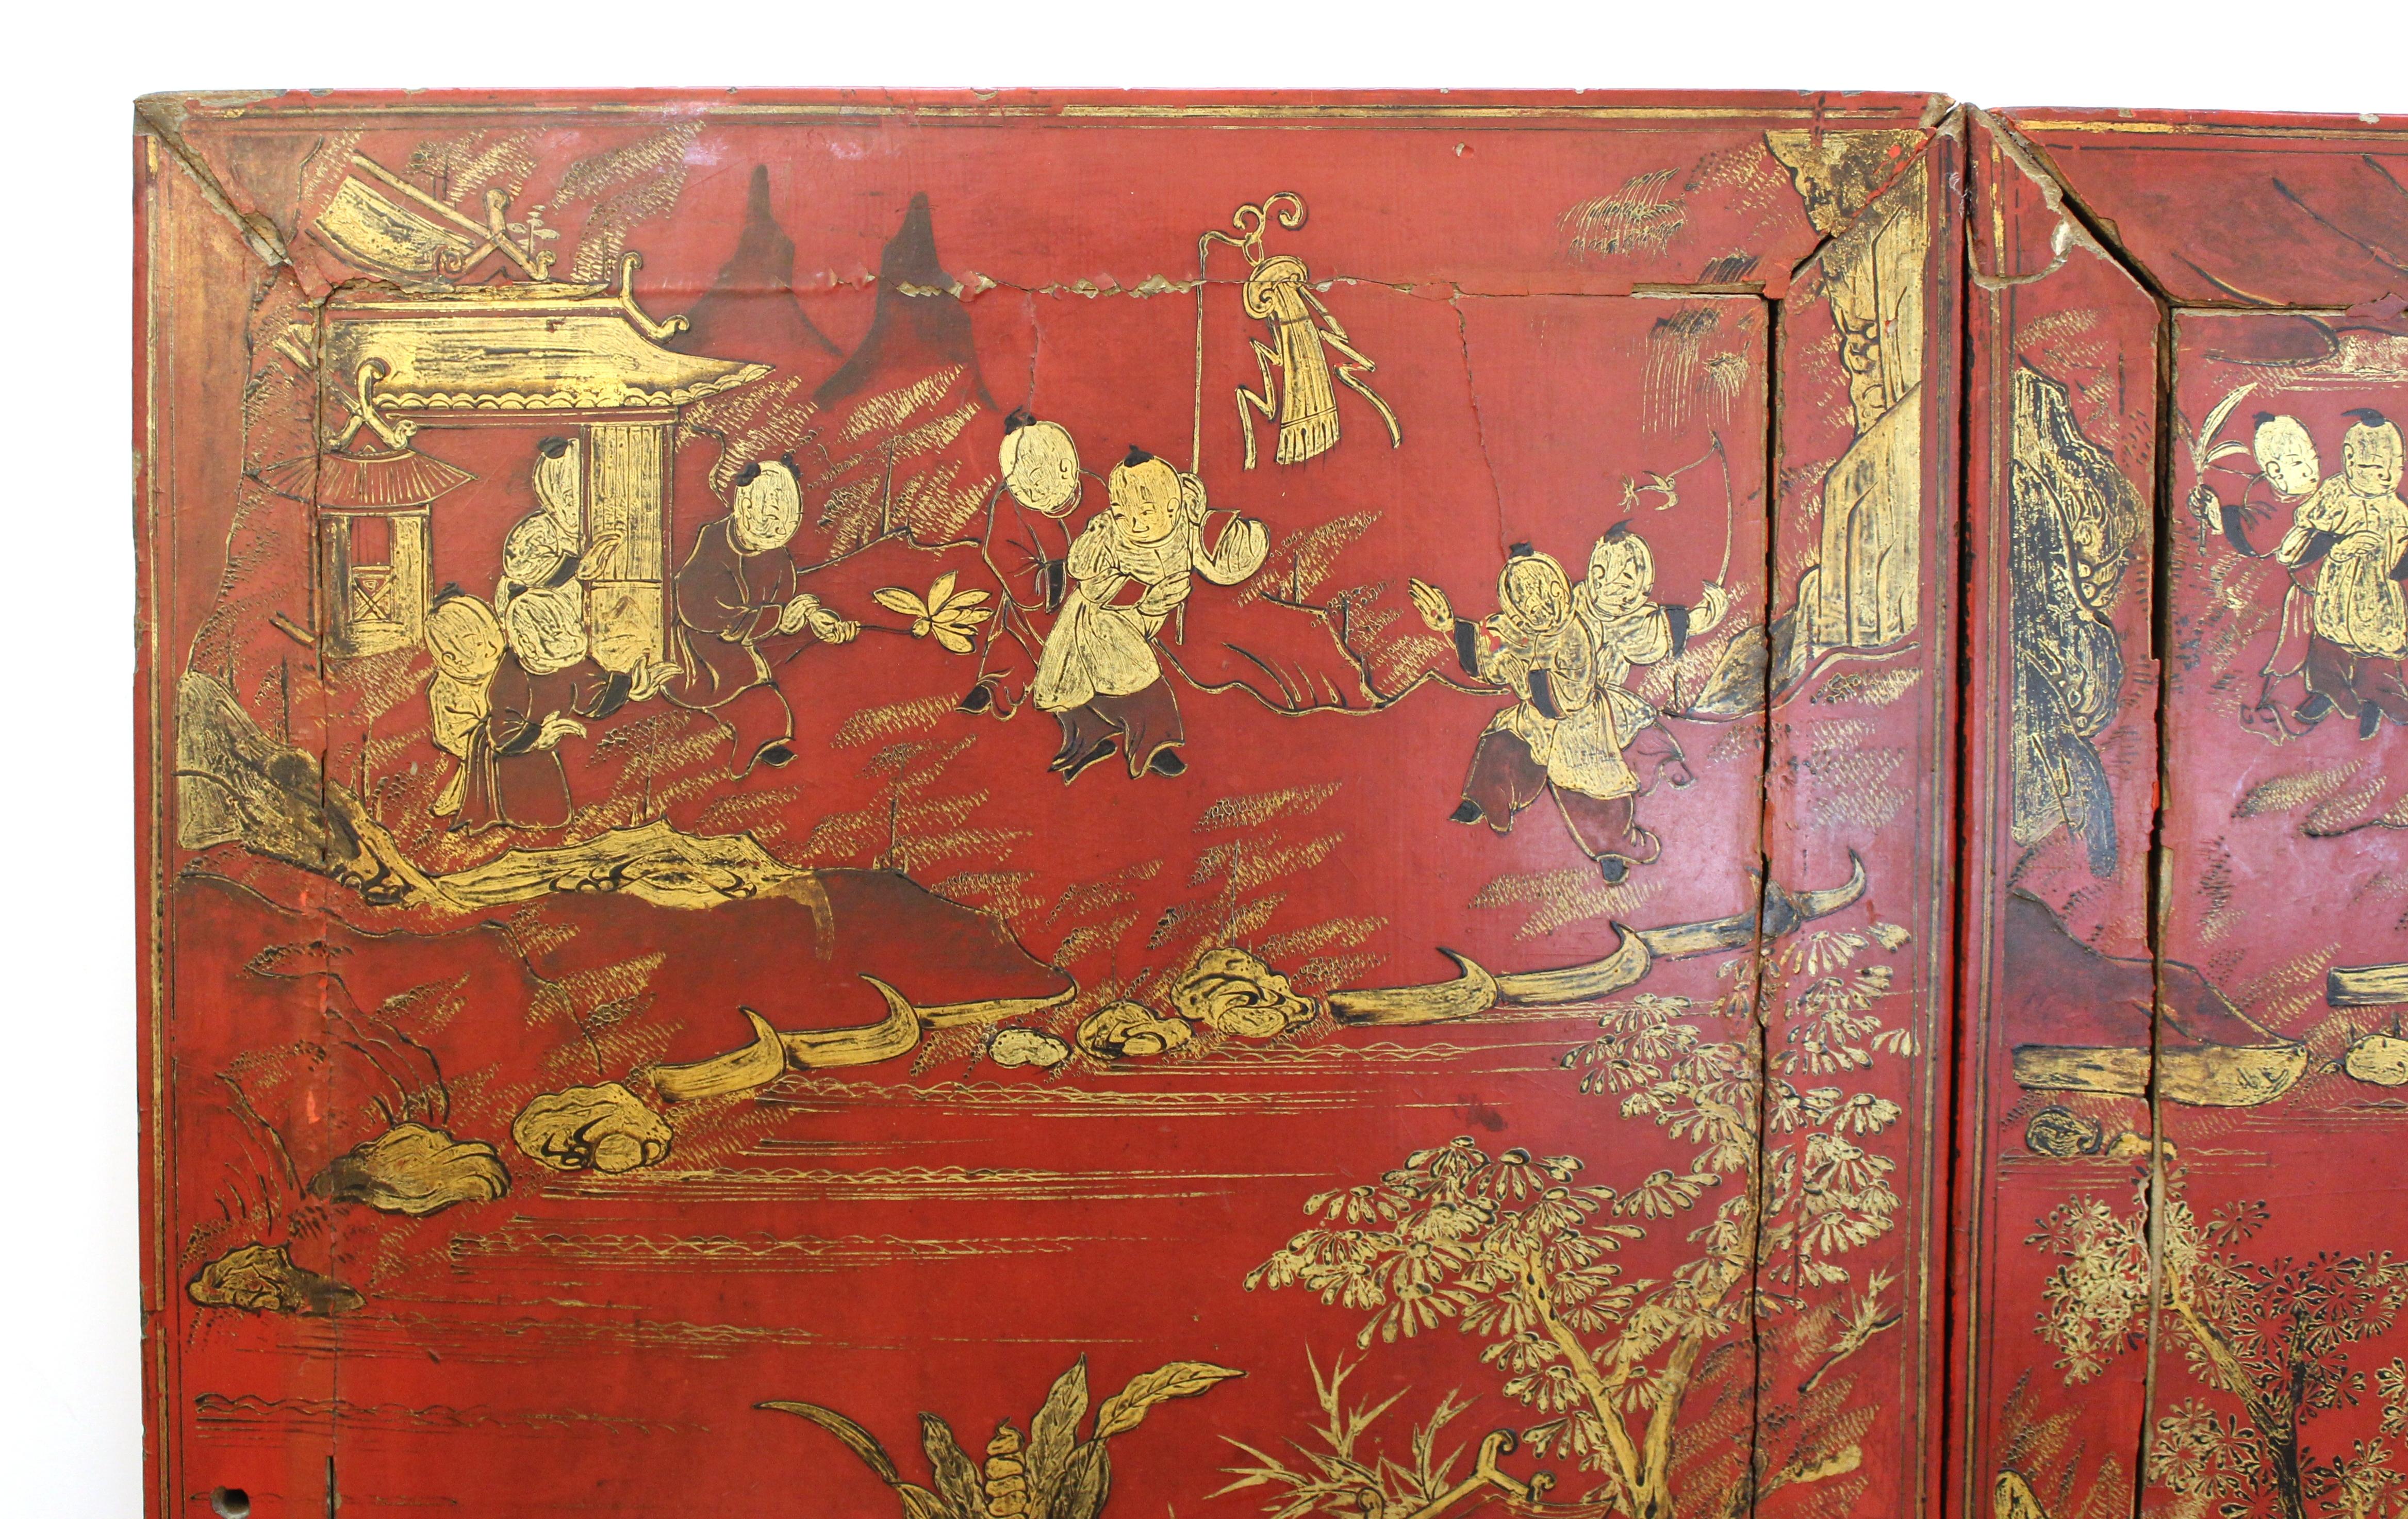 Chinese late 19th century red lacquered door panels with gilt decor depicting landscapes with architecture and young boys playing. The panels likely came from a cabinet and are mounted together to be hung as decorative wall element.